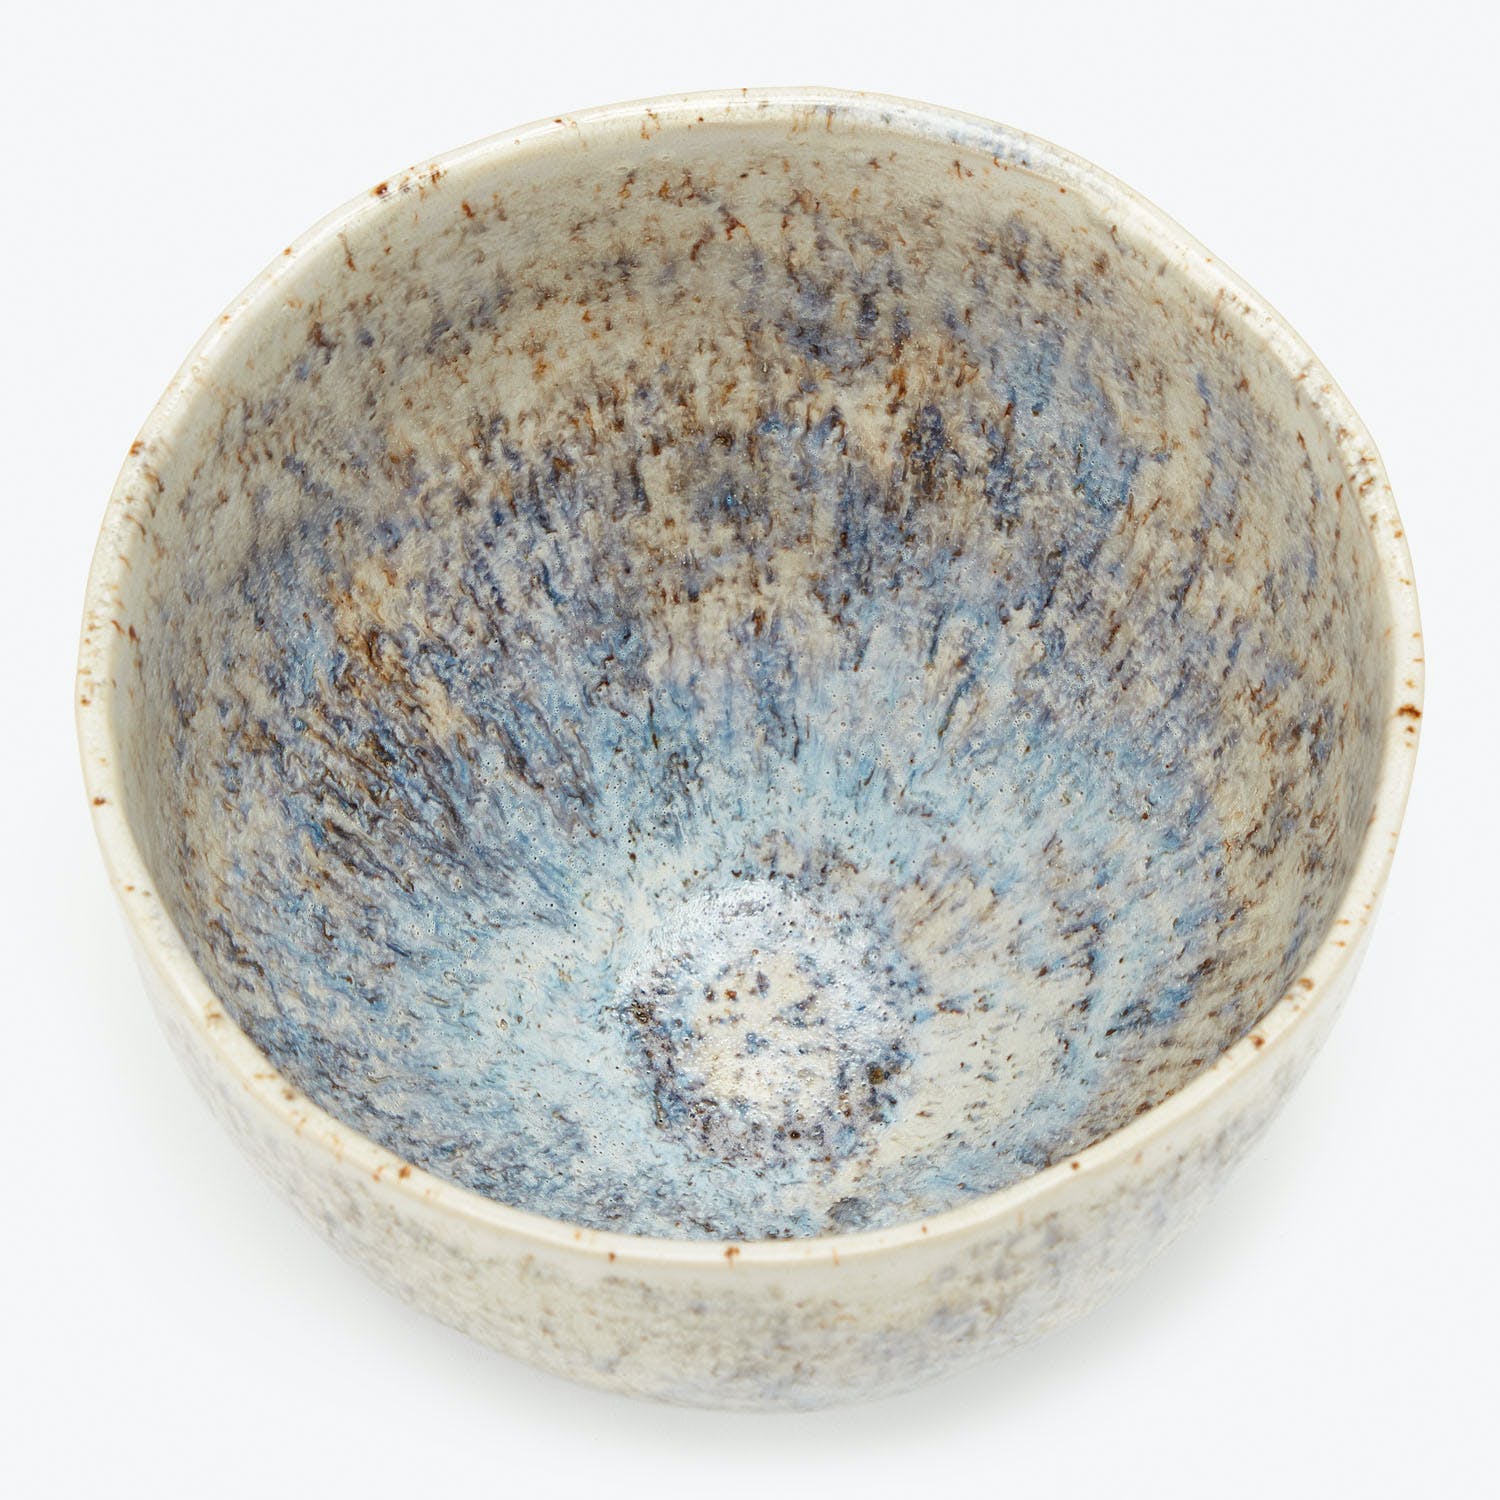 Handcrafted ceramic bowl with unique glaze showcases beautiful color blending